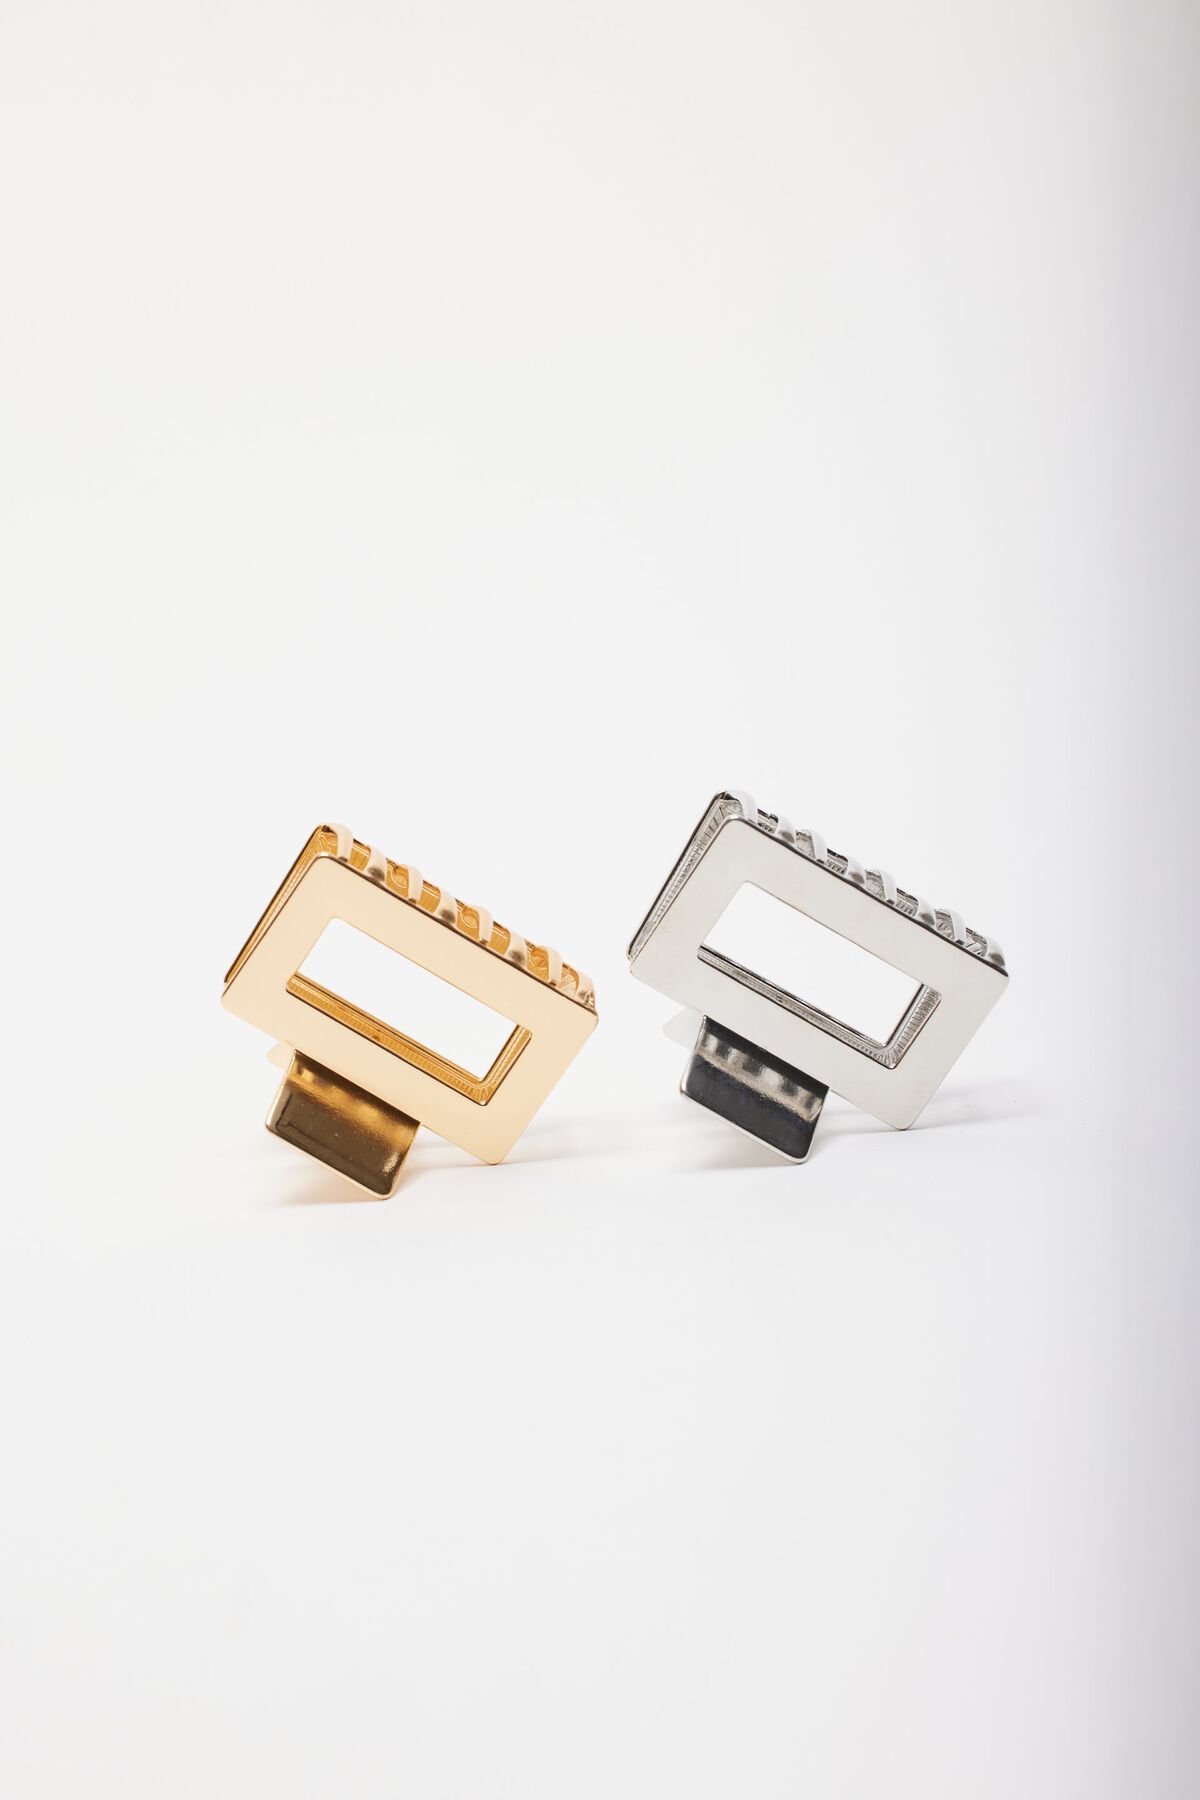 Dynamite 2-Pack Small Square Claw Hair Clip. 3